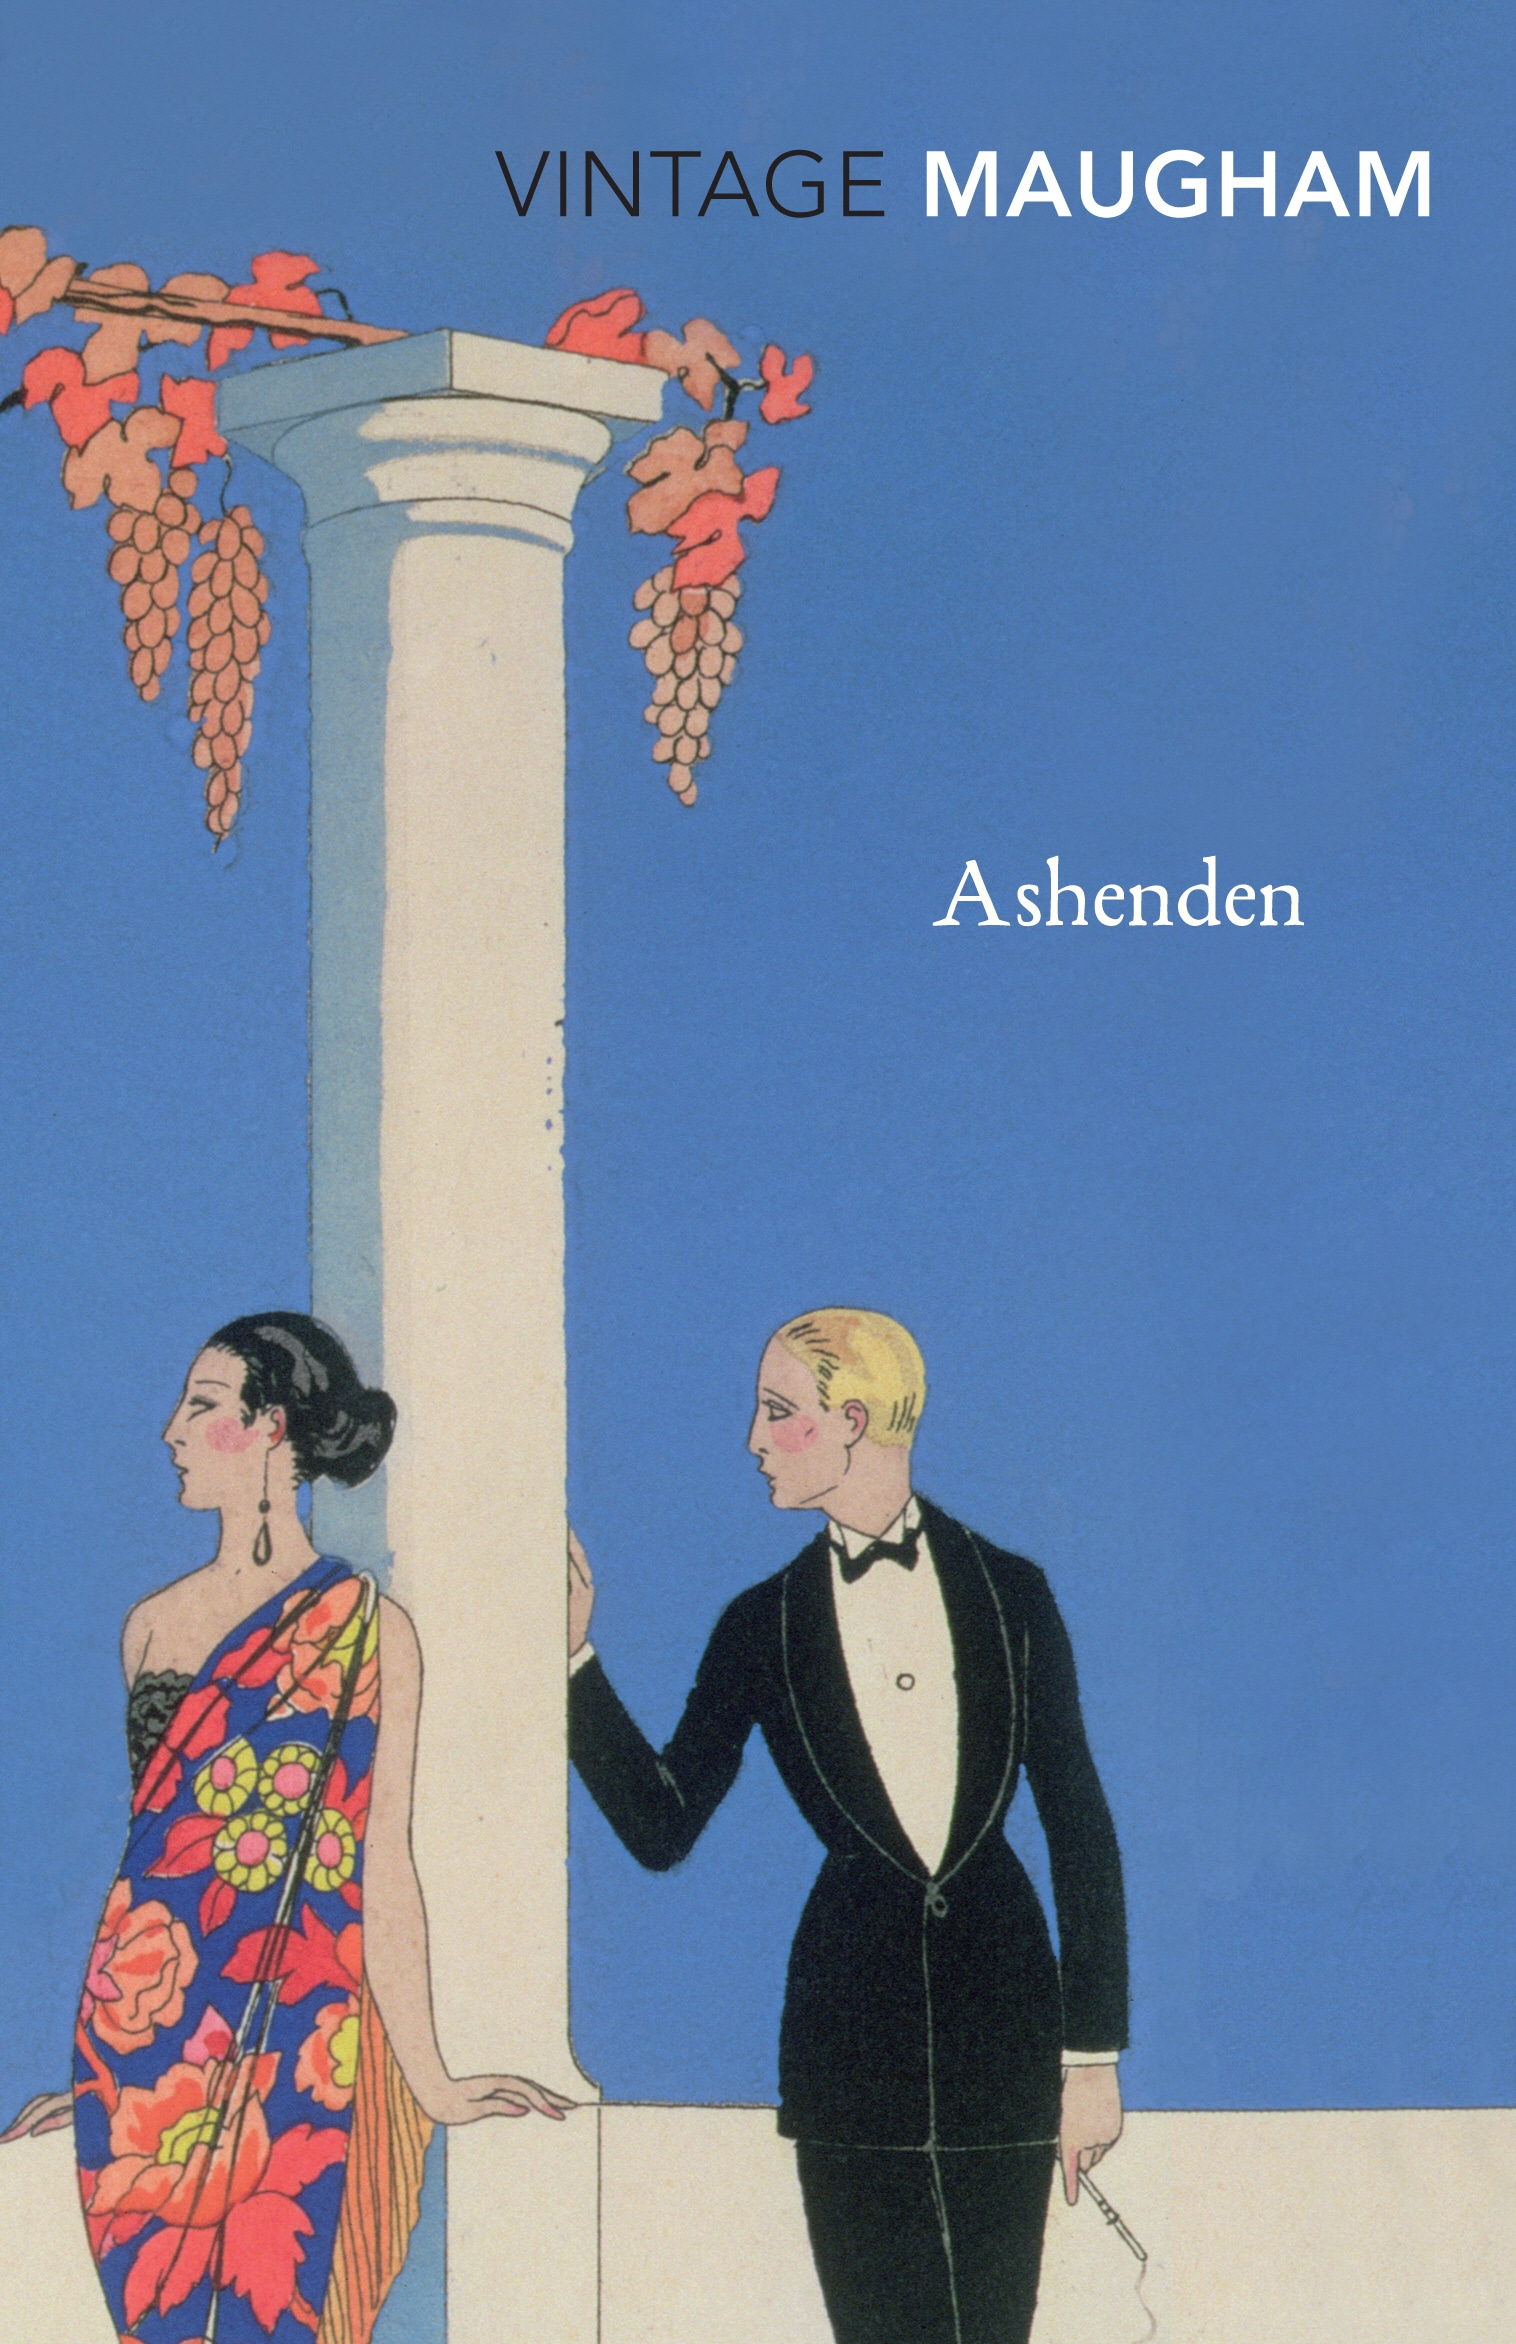 Book “Ashenden” by W. Somerset Maugham — July 6, 2000